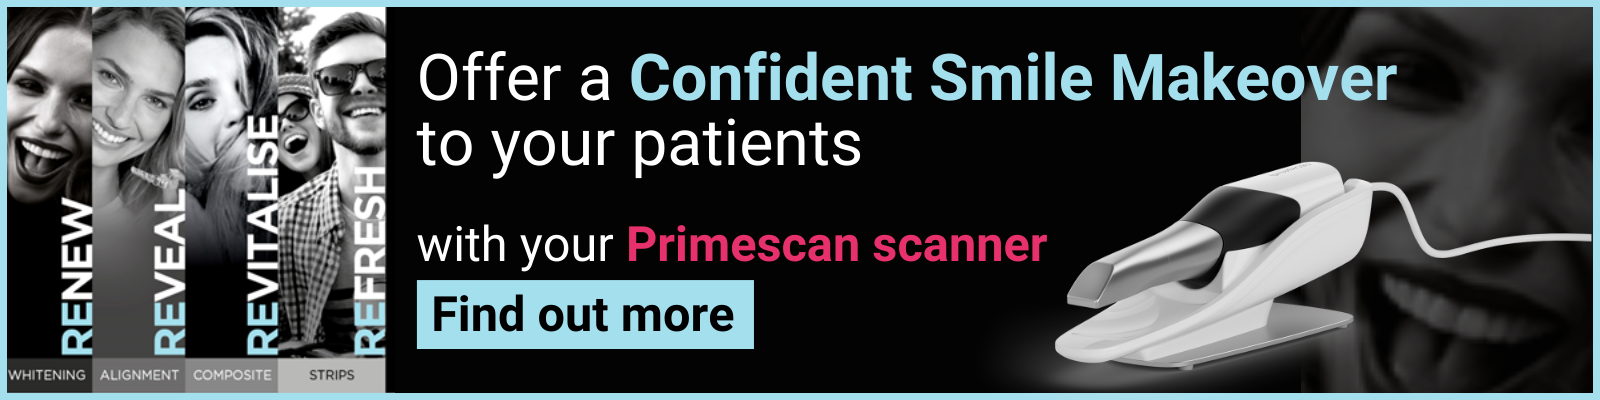 Offer a Confident Smile Makeover to your patients with your Primescan intraoral scanner - Find out more